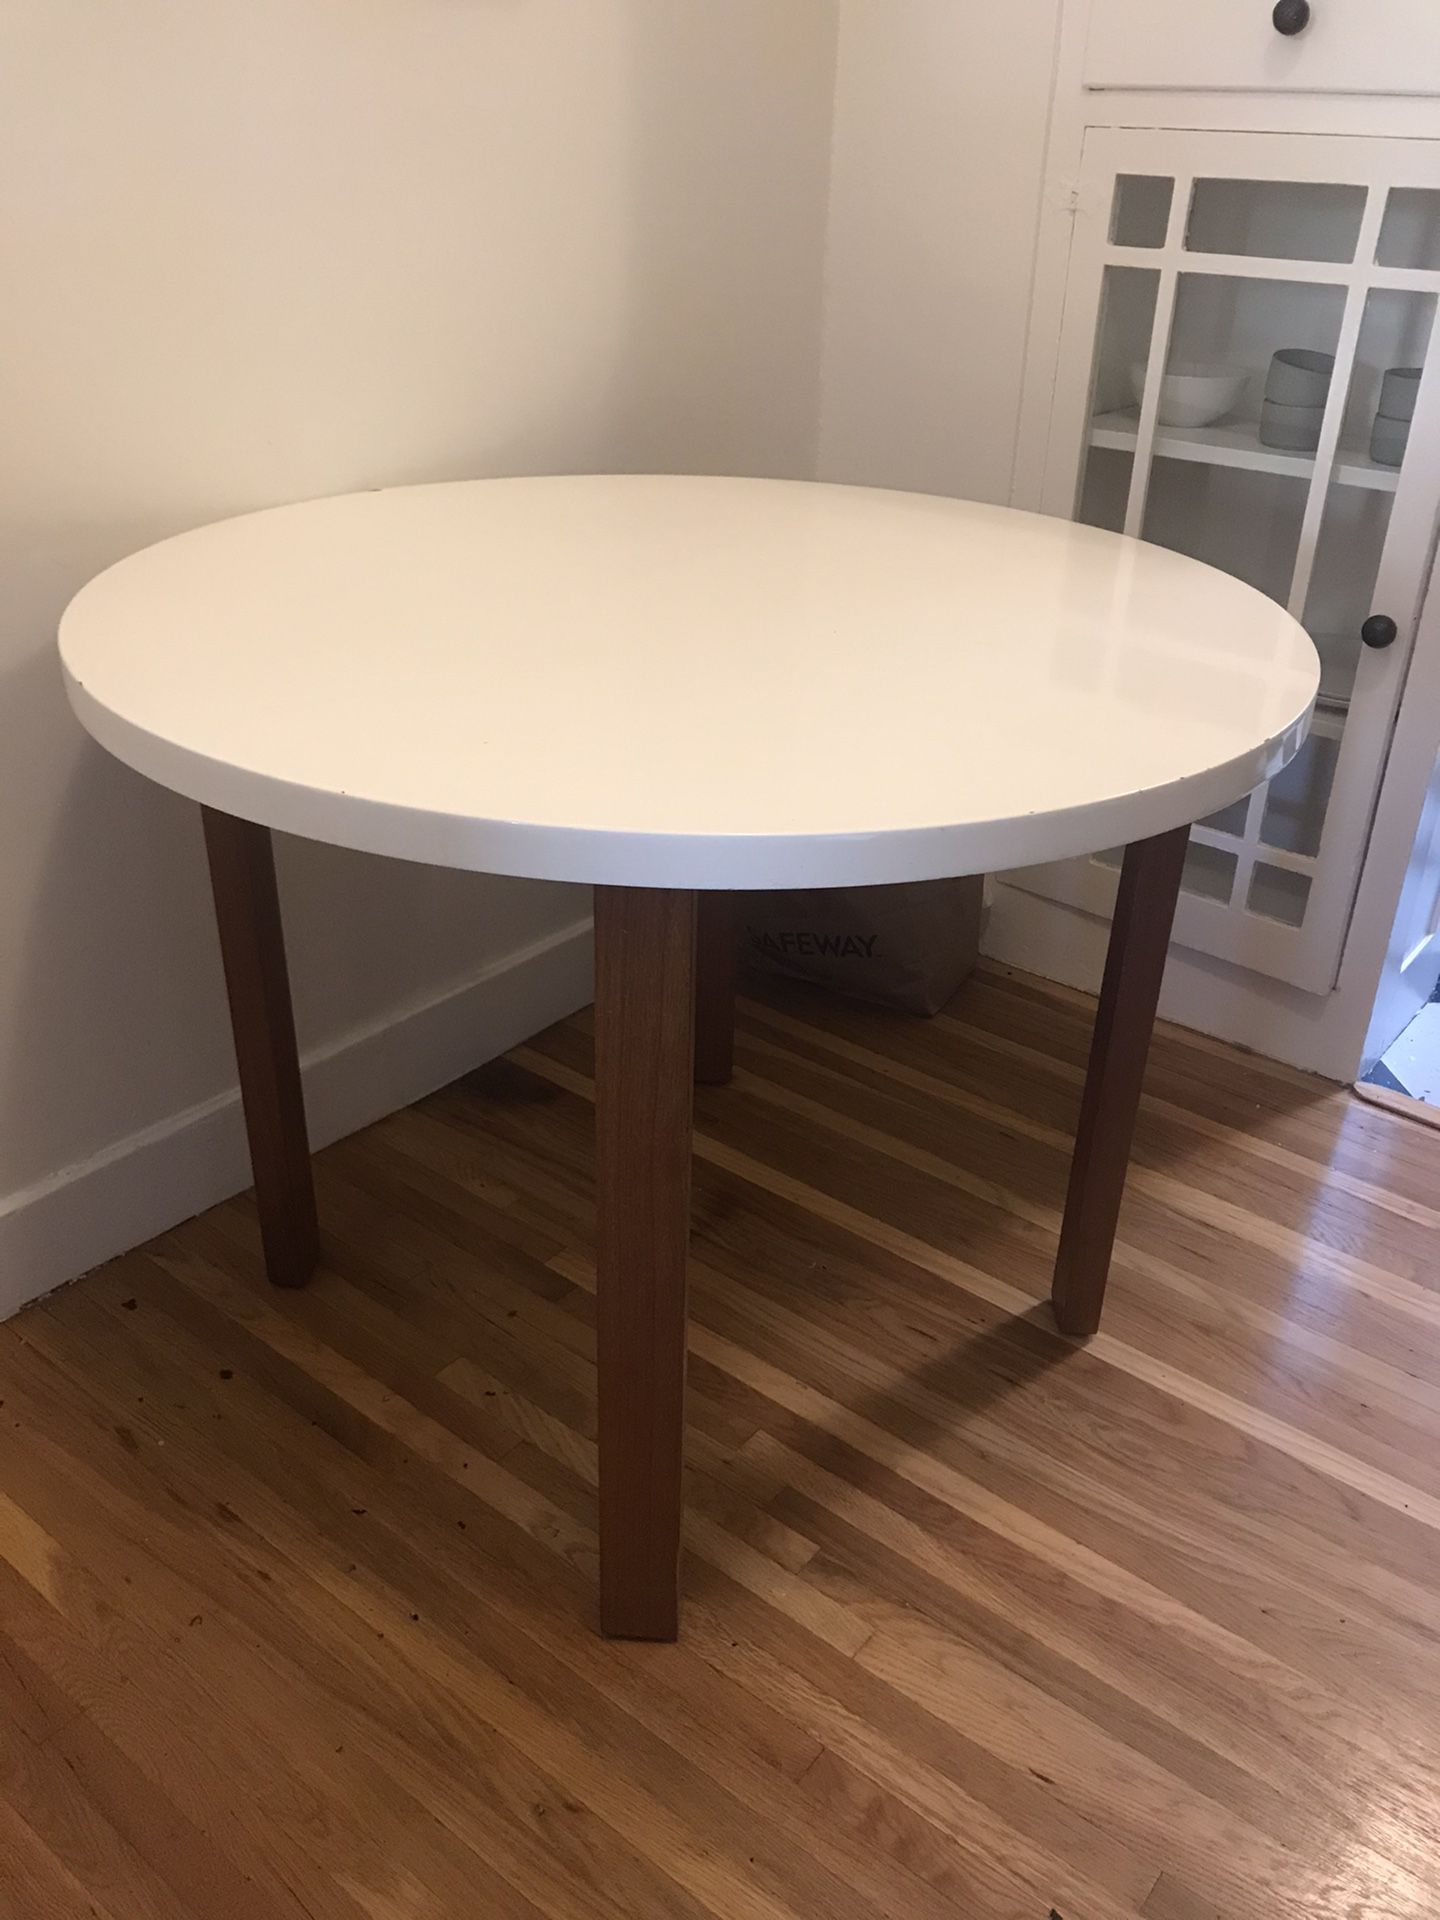 Crate & Barrel kitchen table